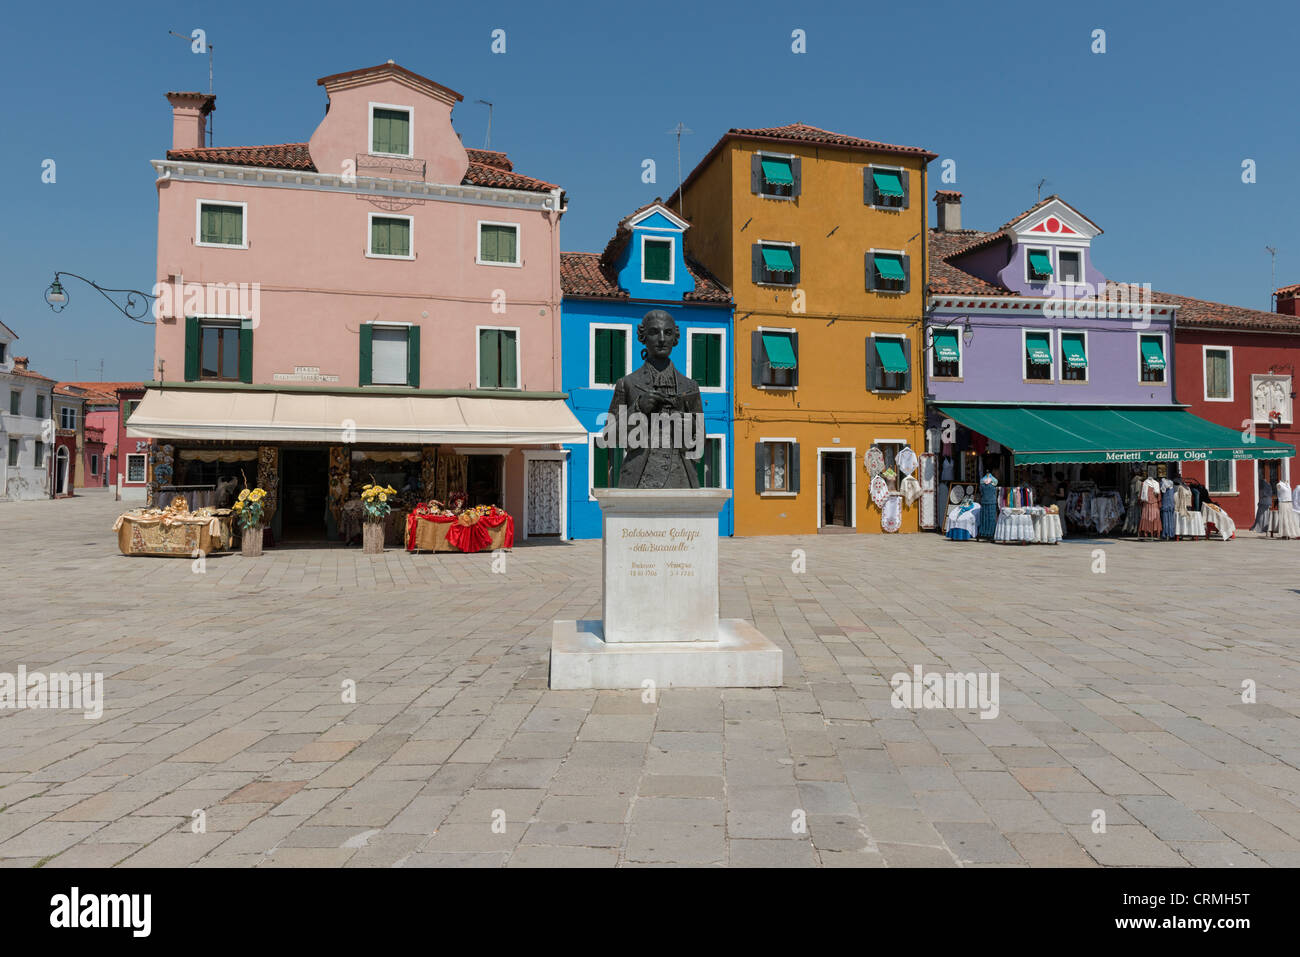 Piazza Baldassare Galuppi in Burano. Burano island in Venice Lagoon famous for colourful painted buildings and houses Stock Photo